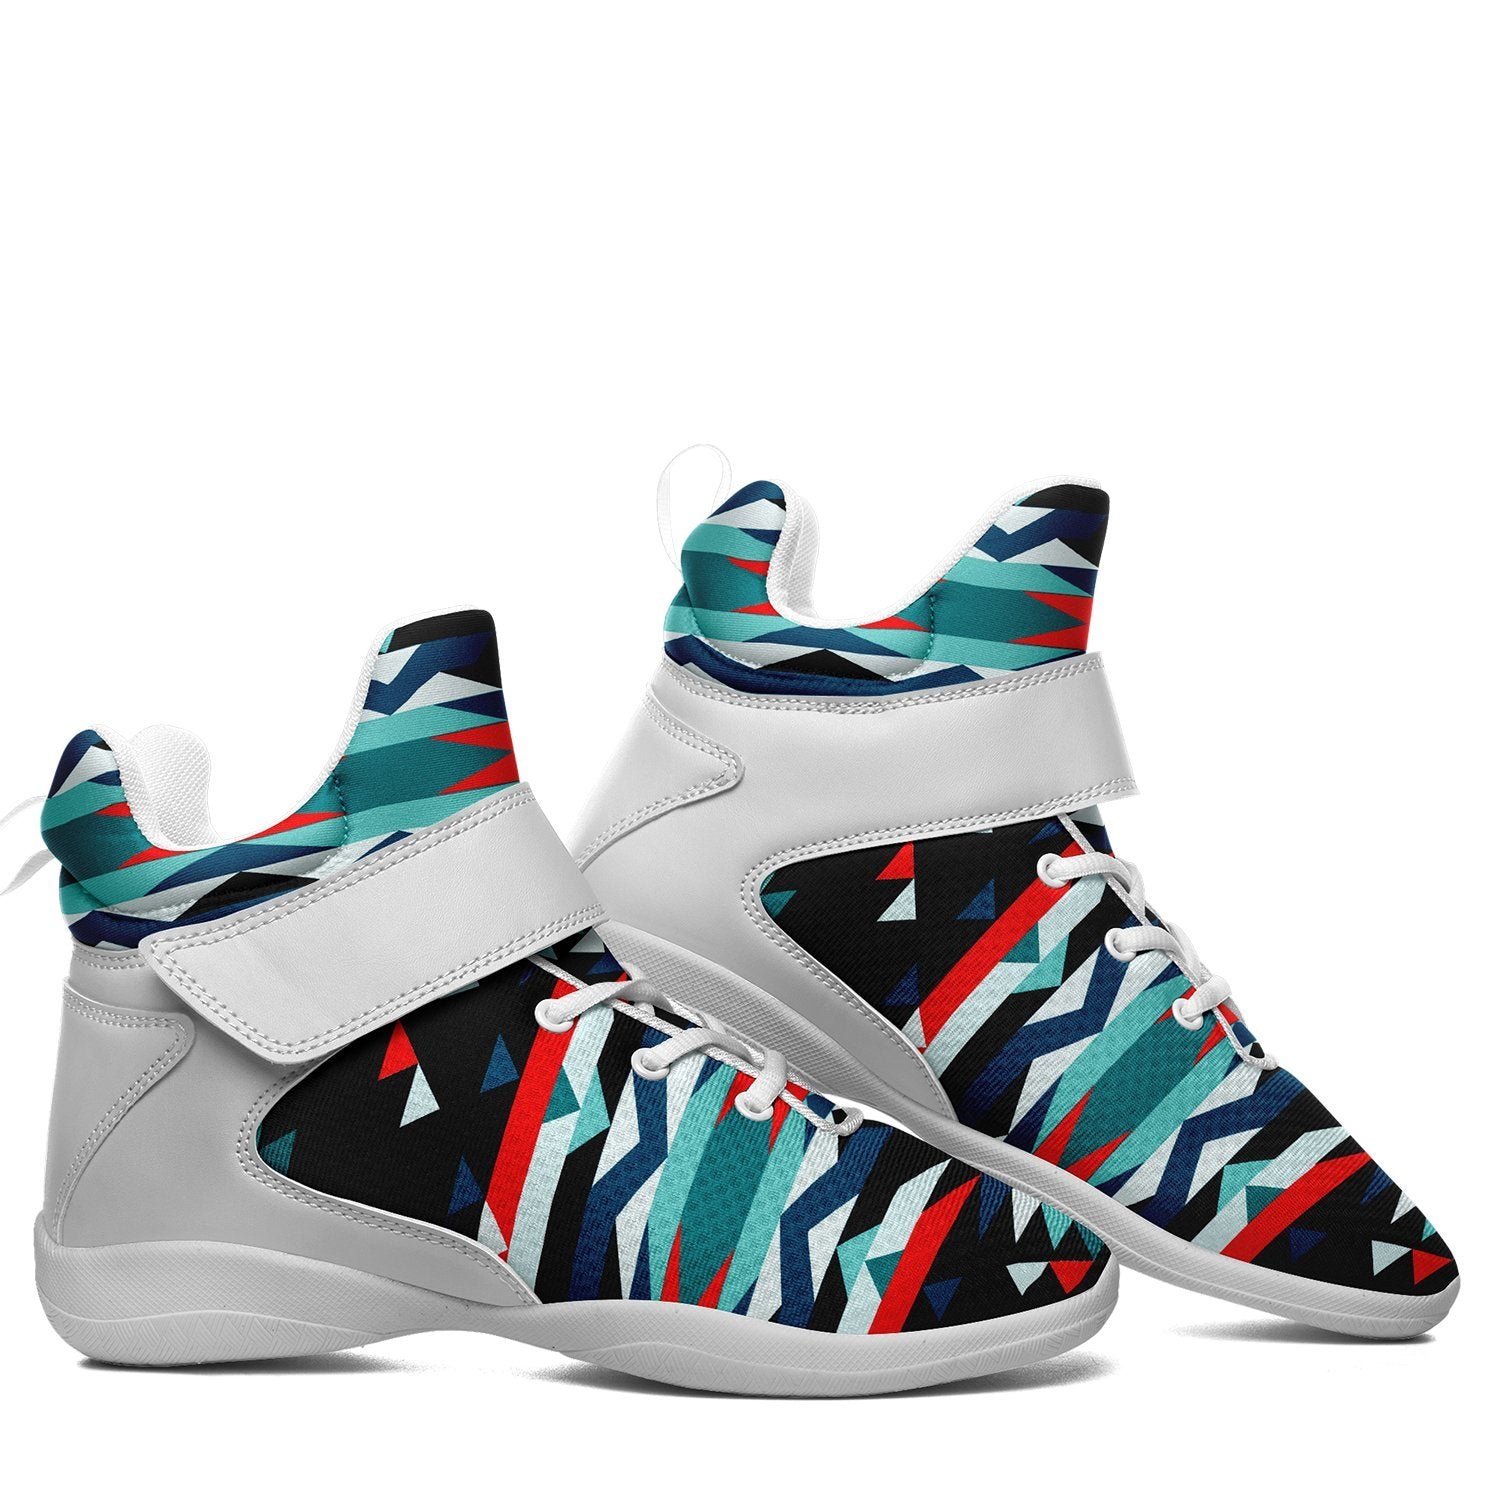 Visions of Peaceful Nights Ipottaa Basketball / Sport High Top Shoes 49 Dzine 